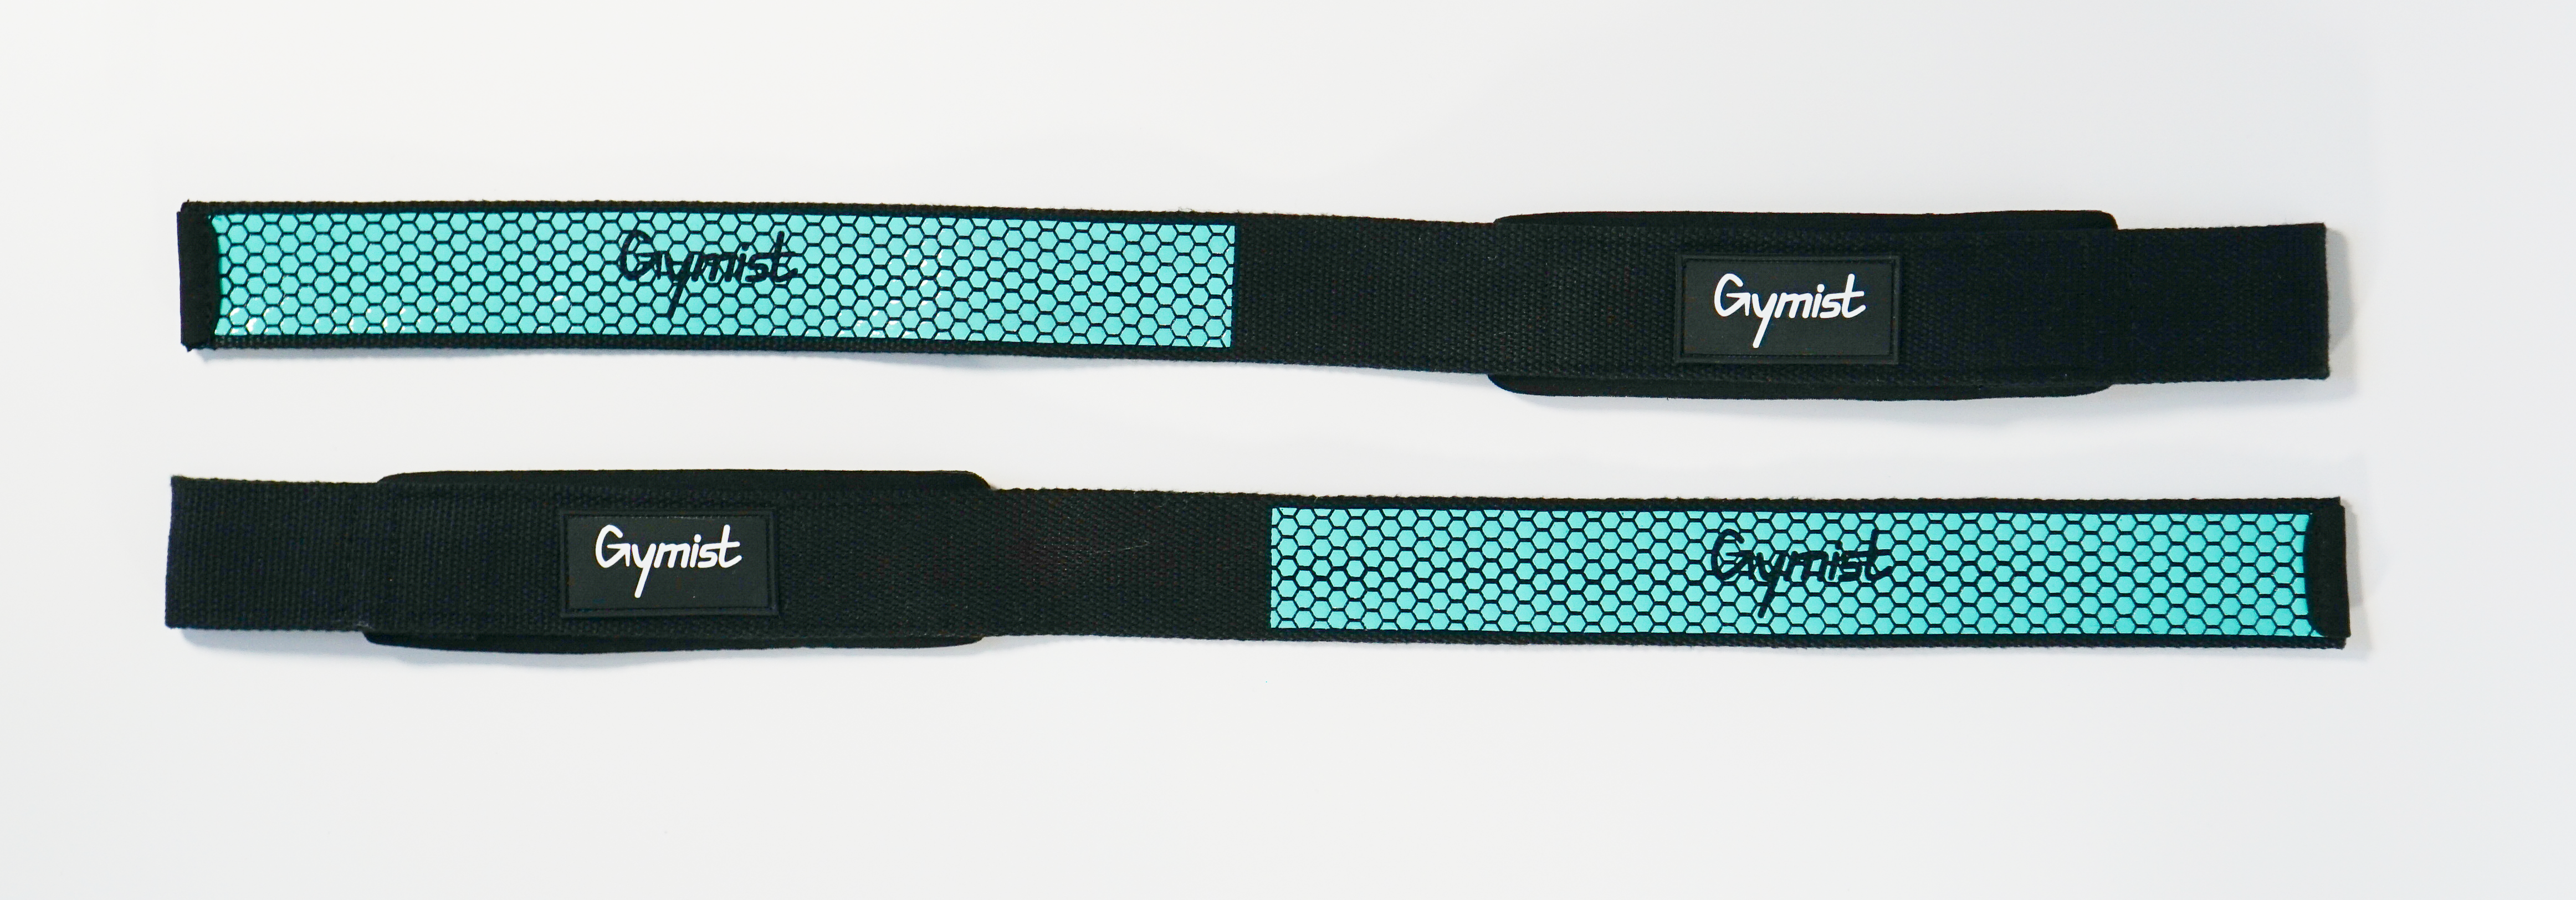 Image of Gymist's weight lifting straps